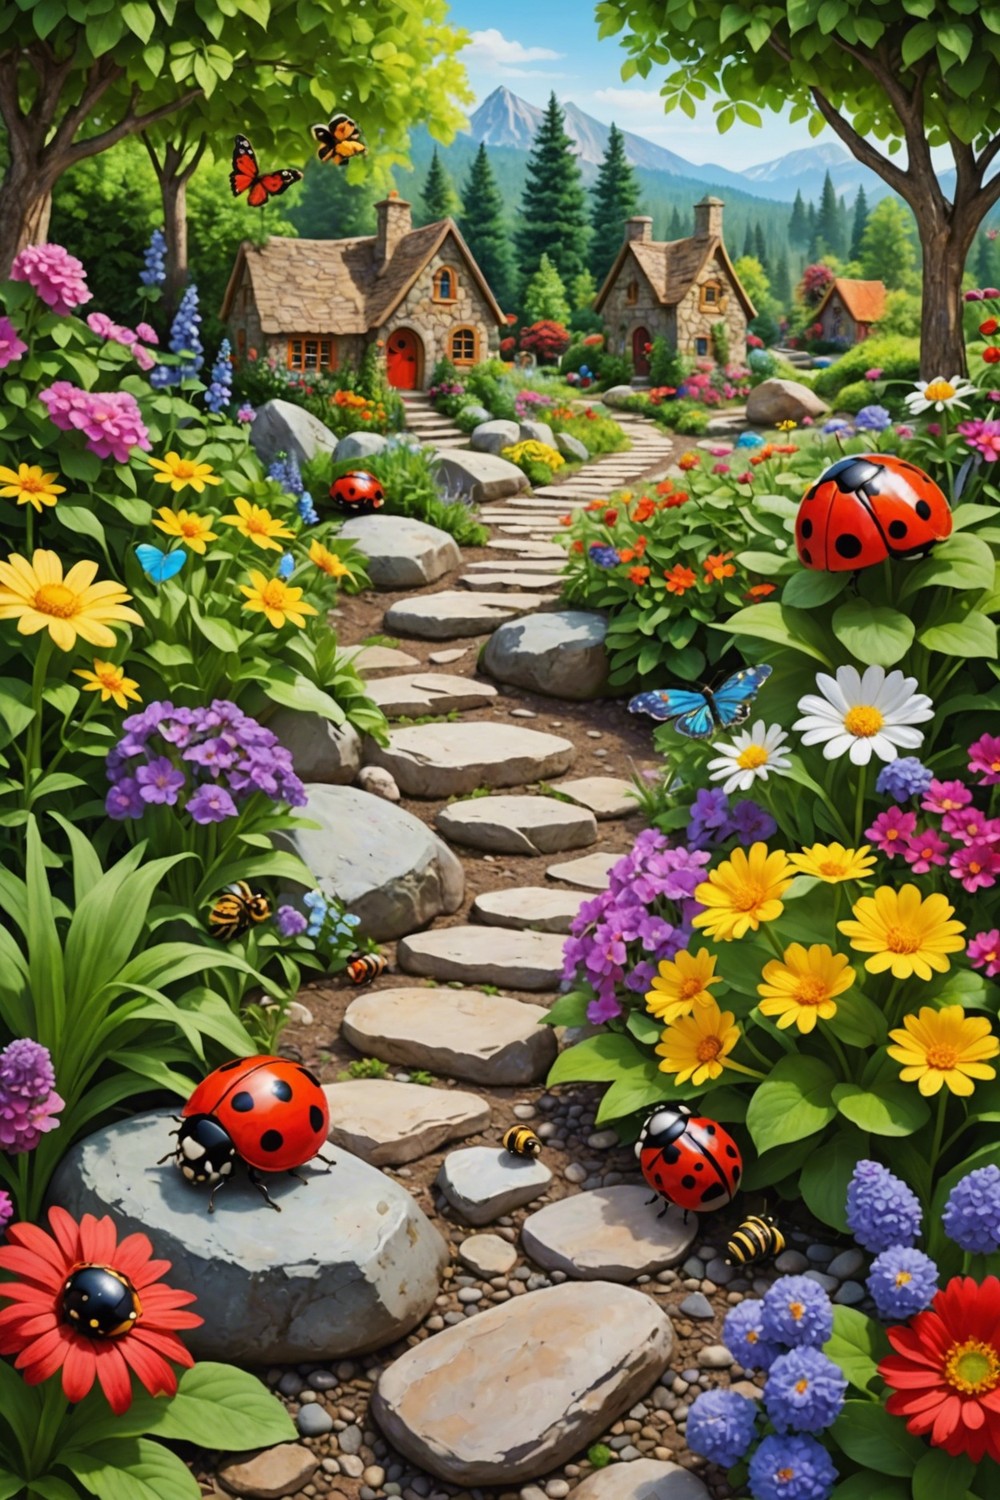 Rock Ladybugs and Other Garden Pests